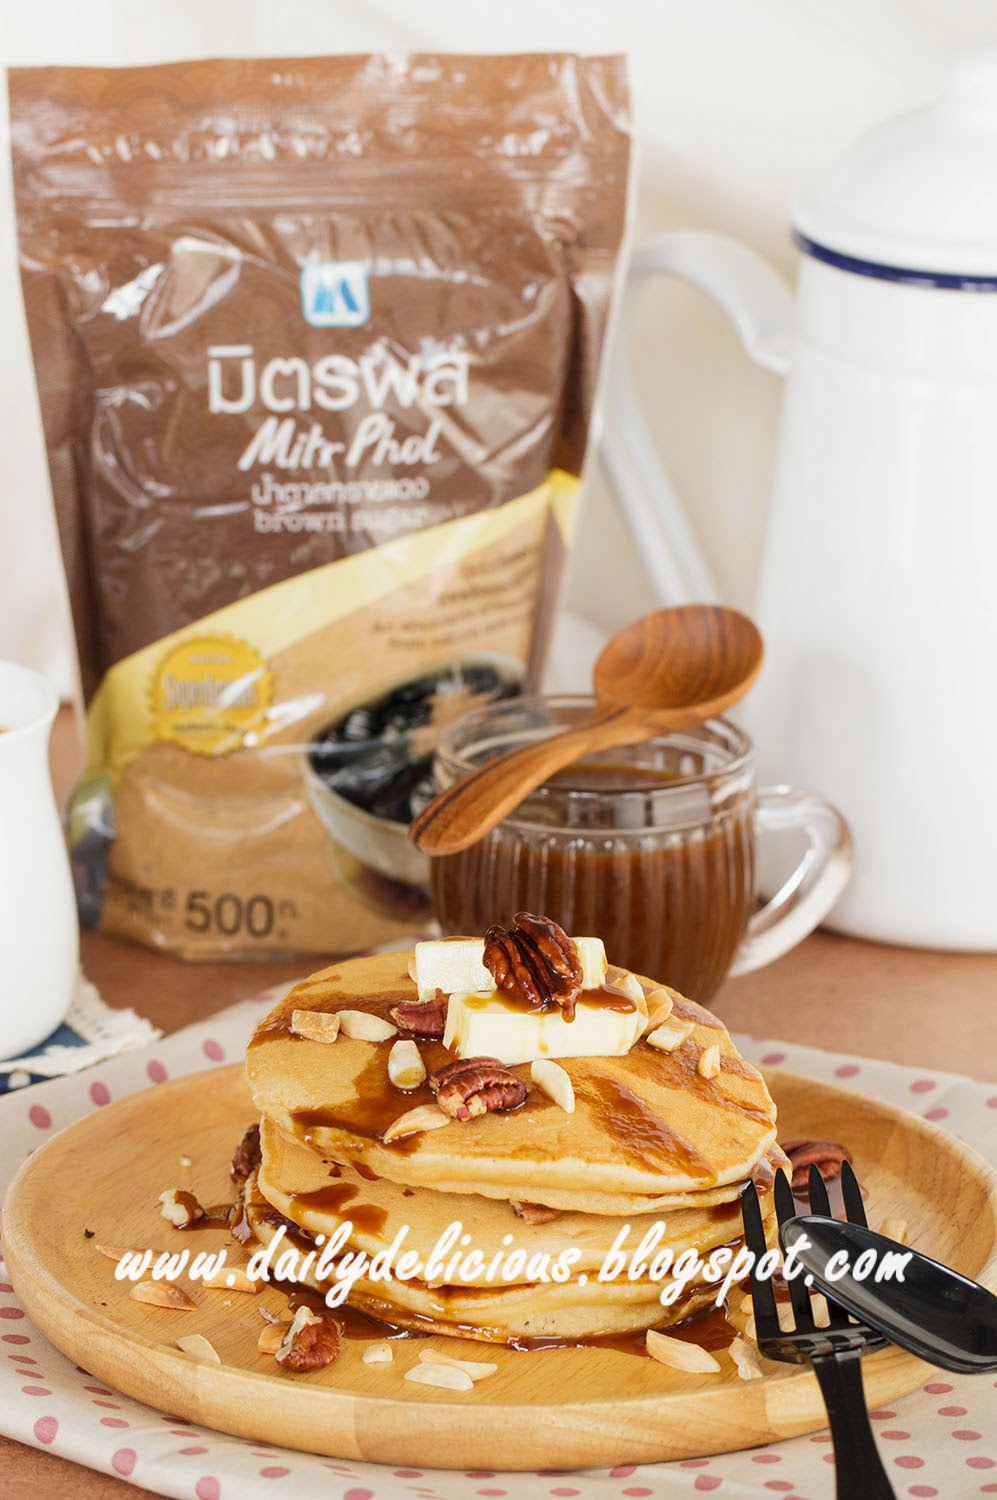 dailydelicious: Thick brown sugar pancake with Butterscotch toffee sauce